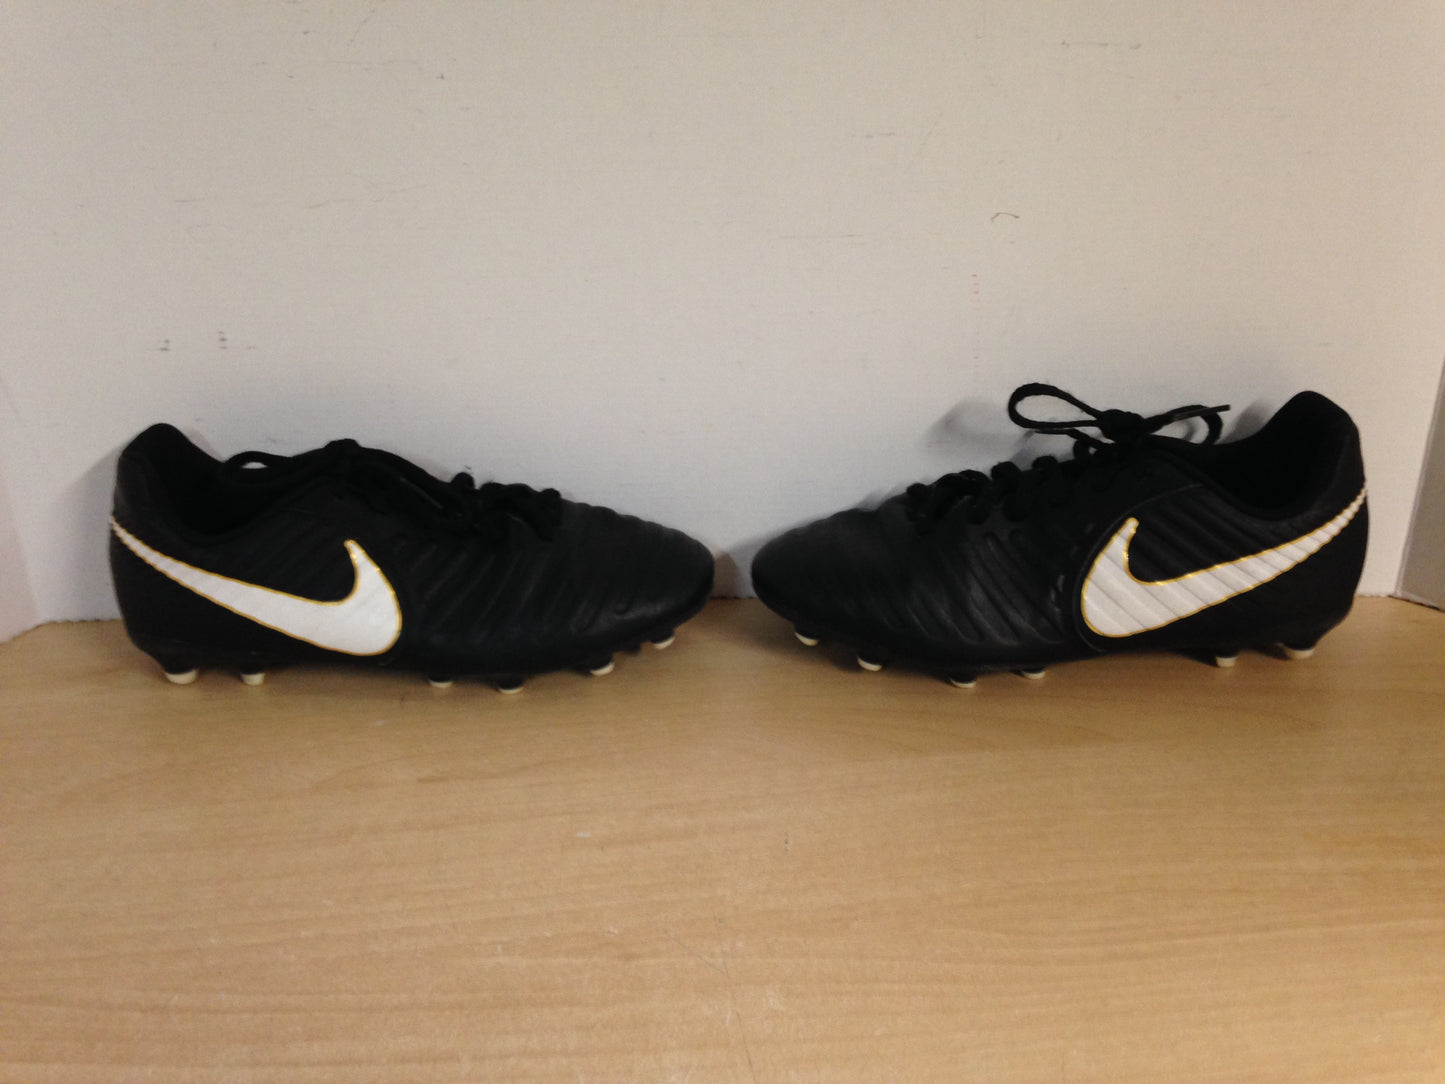 Soccer Shoes Cleats Men's Size 6 Nike Tiempo Black White Gold